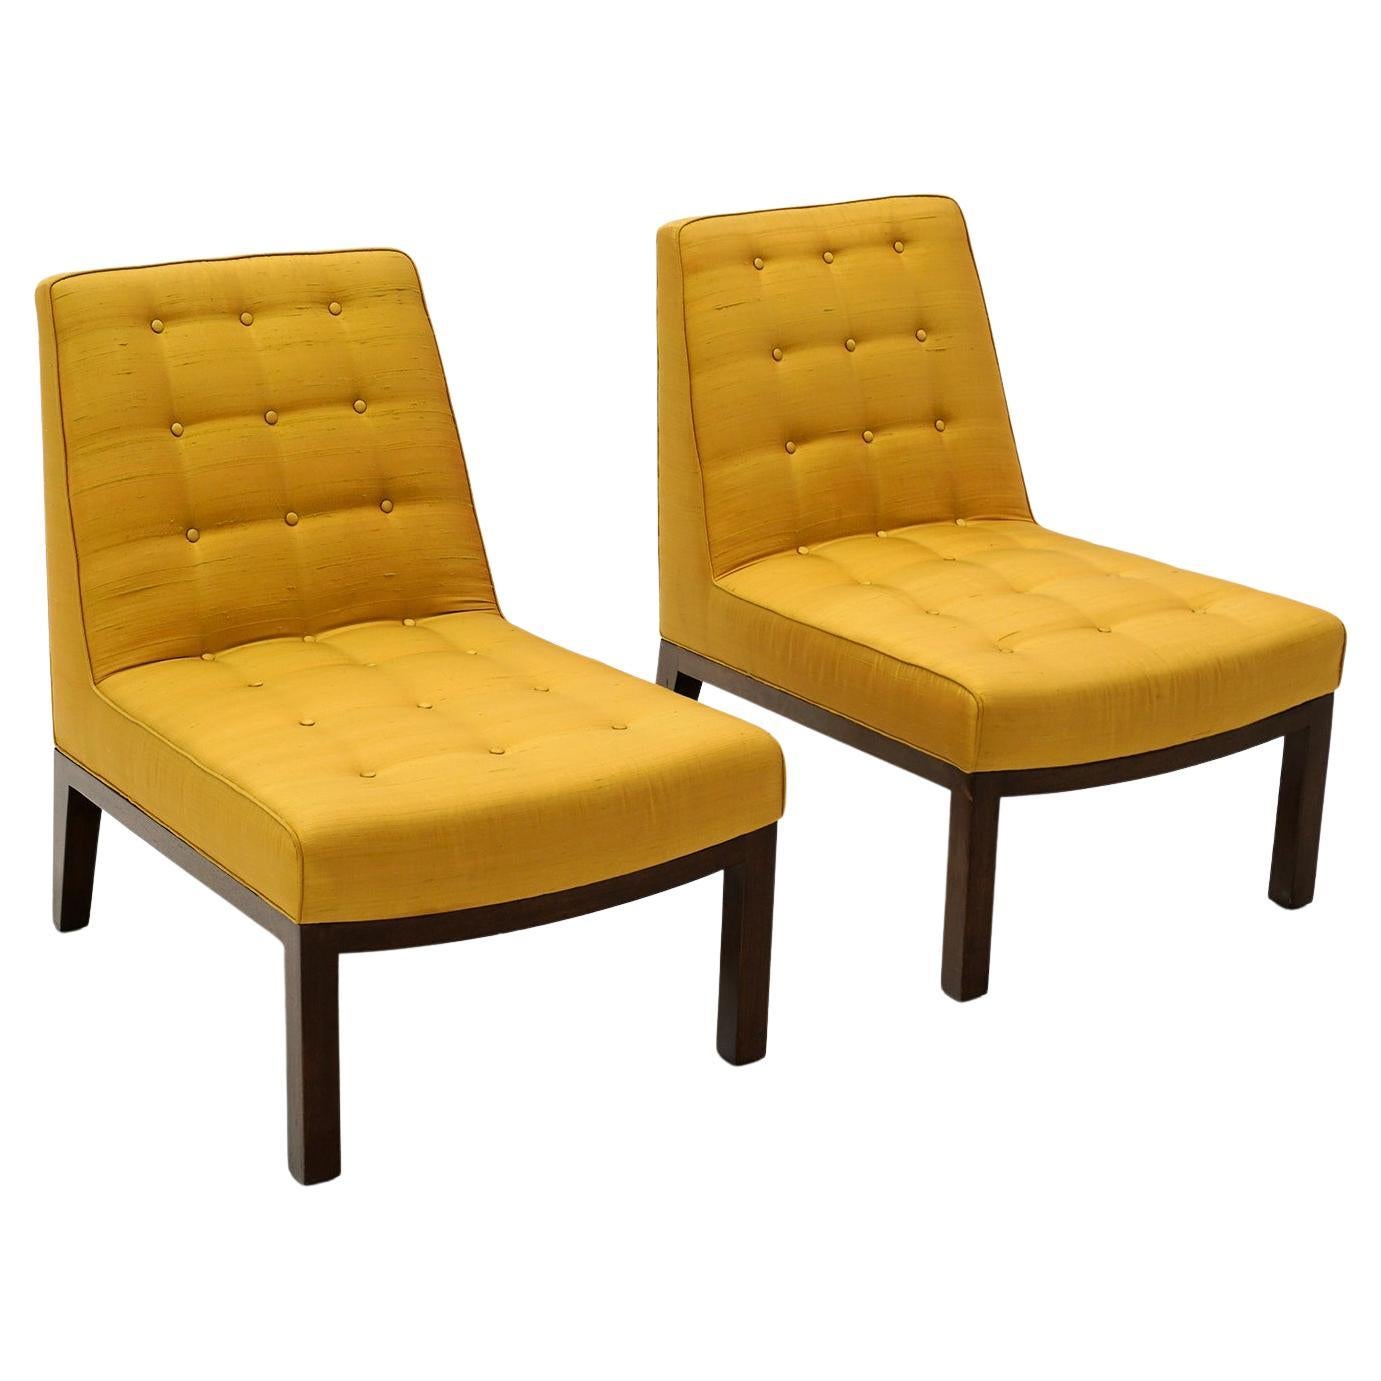 Pair Slipper Lounge Chairs by Edward Wormley for Dunbar, Original, Signed